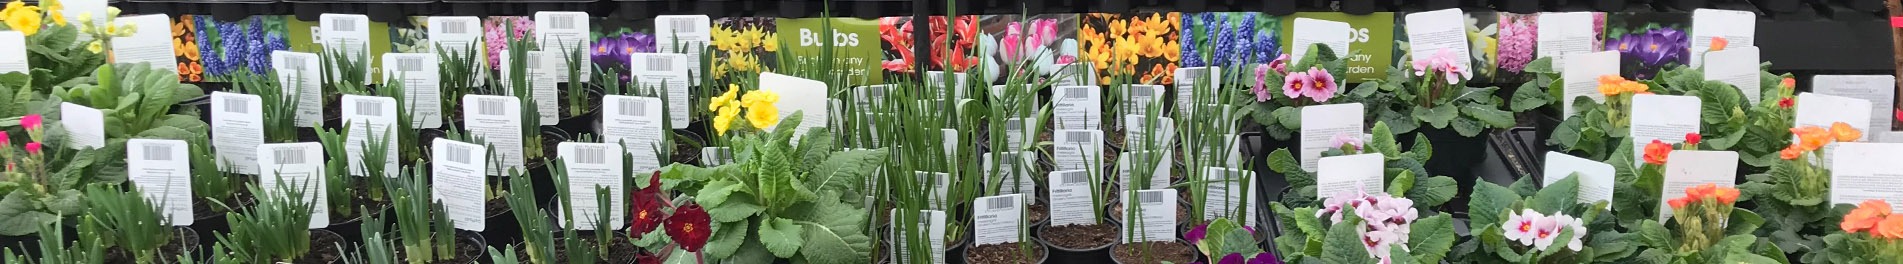 variety of potted plants on display